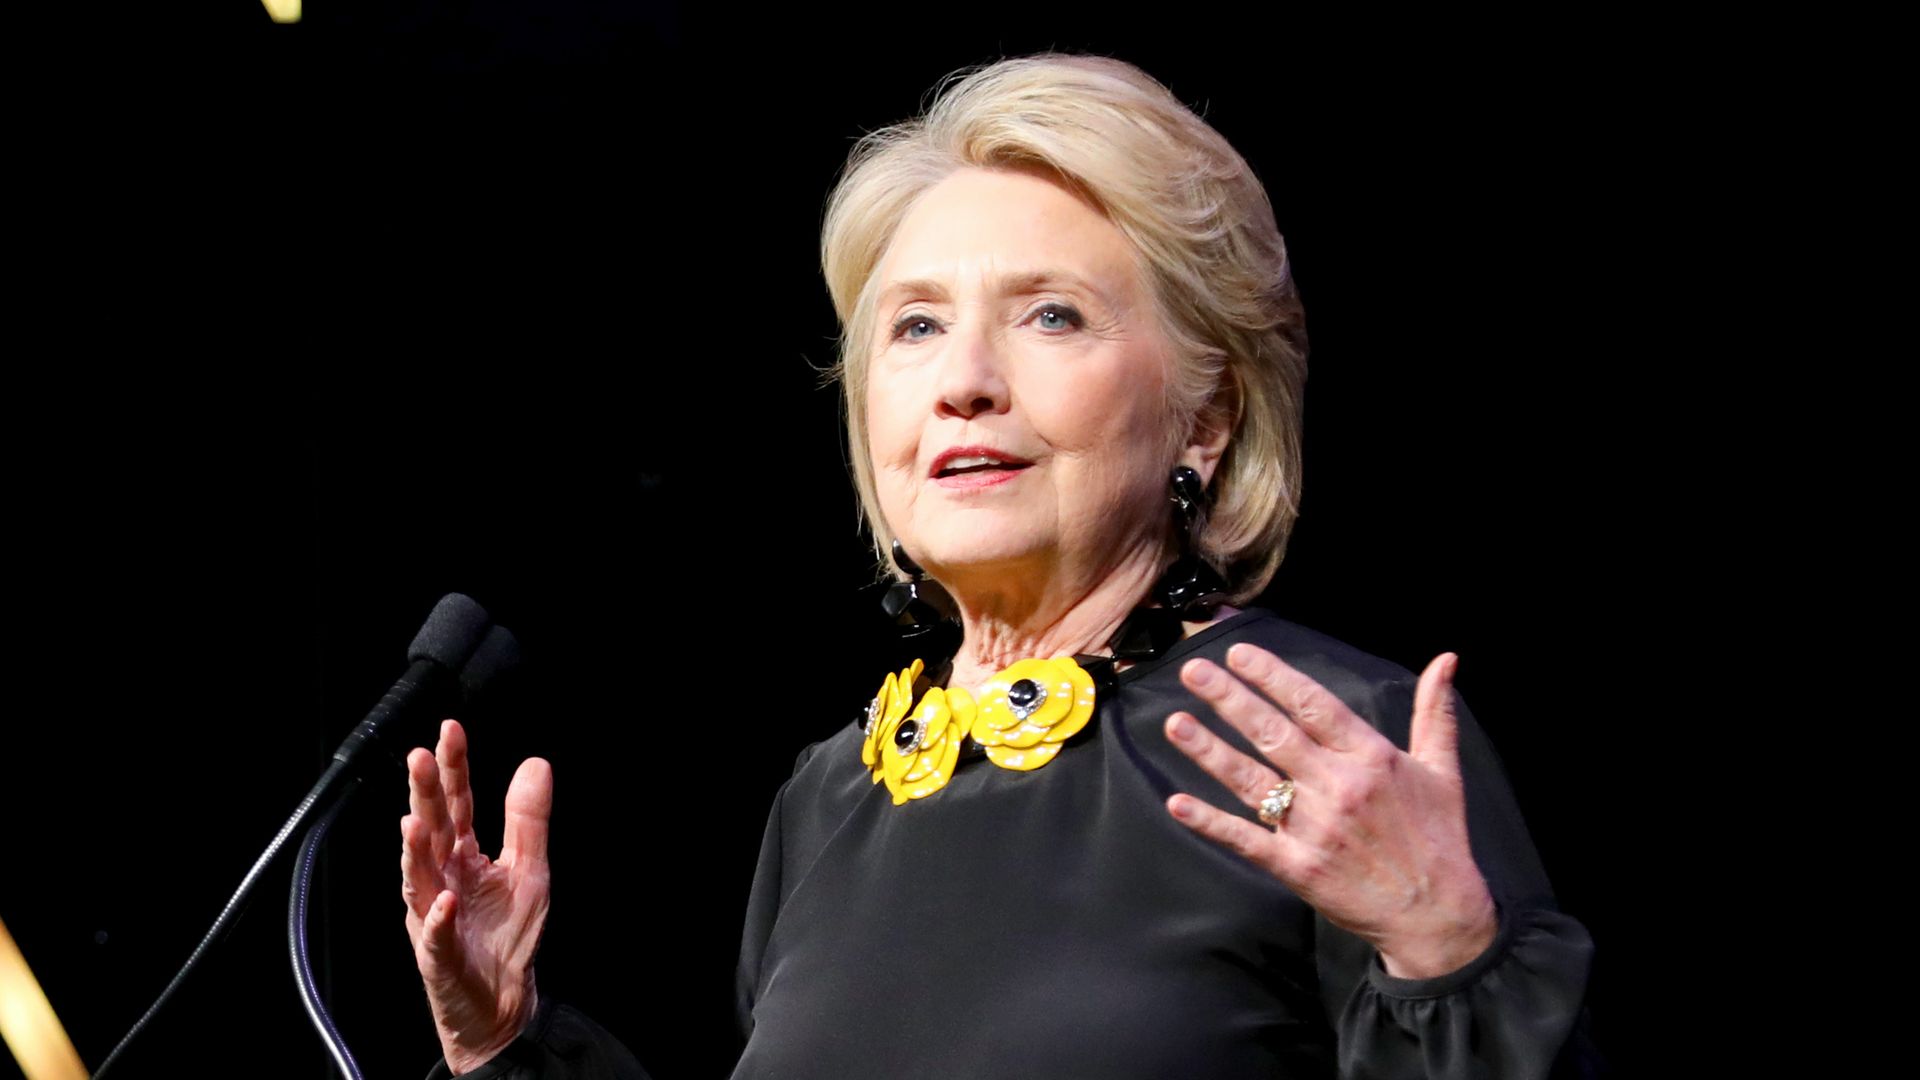 Hillary Clinton says she will continue to speak out on issues.